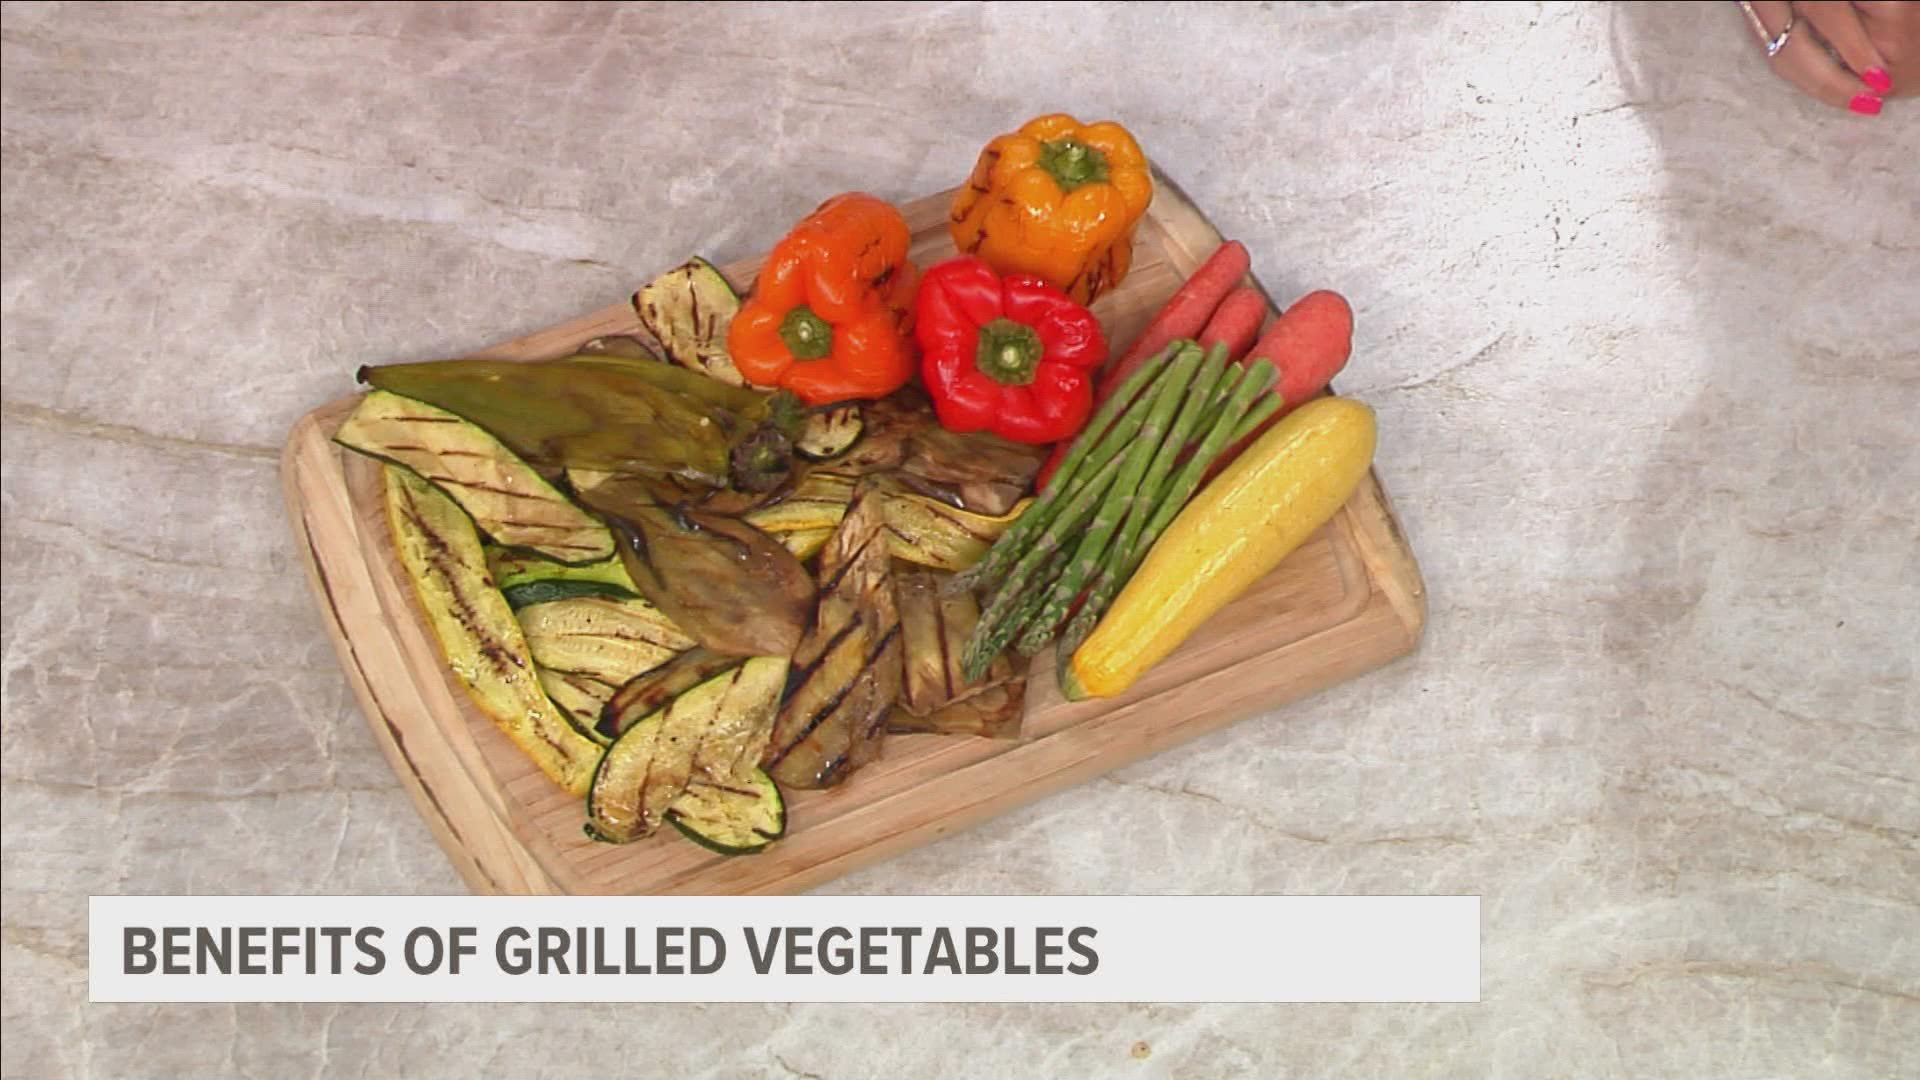 9NEWS Nutrition Expert Malena Perdomo shares three benefits of adding grilled vegetables to your diet this summer.